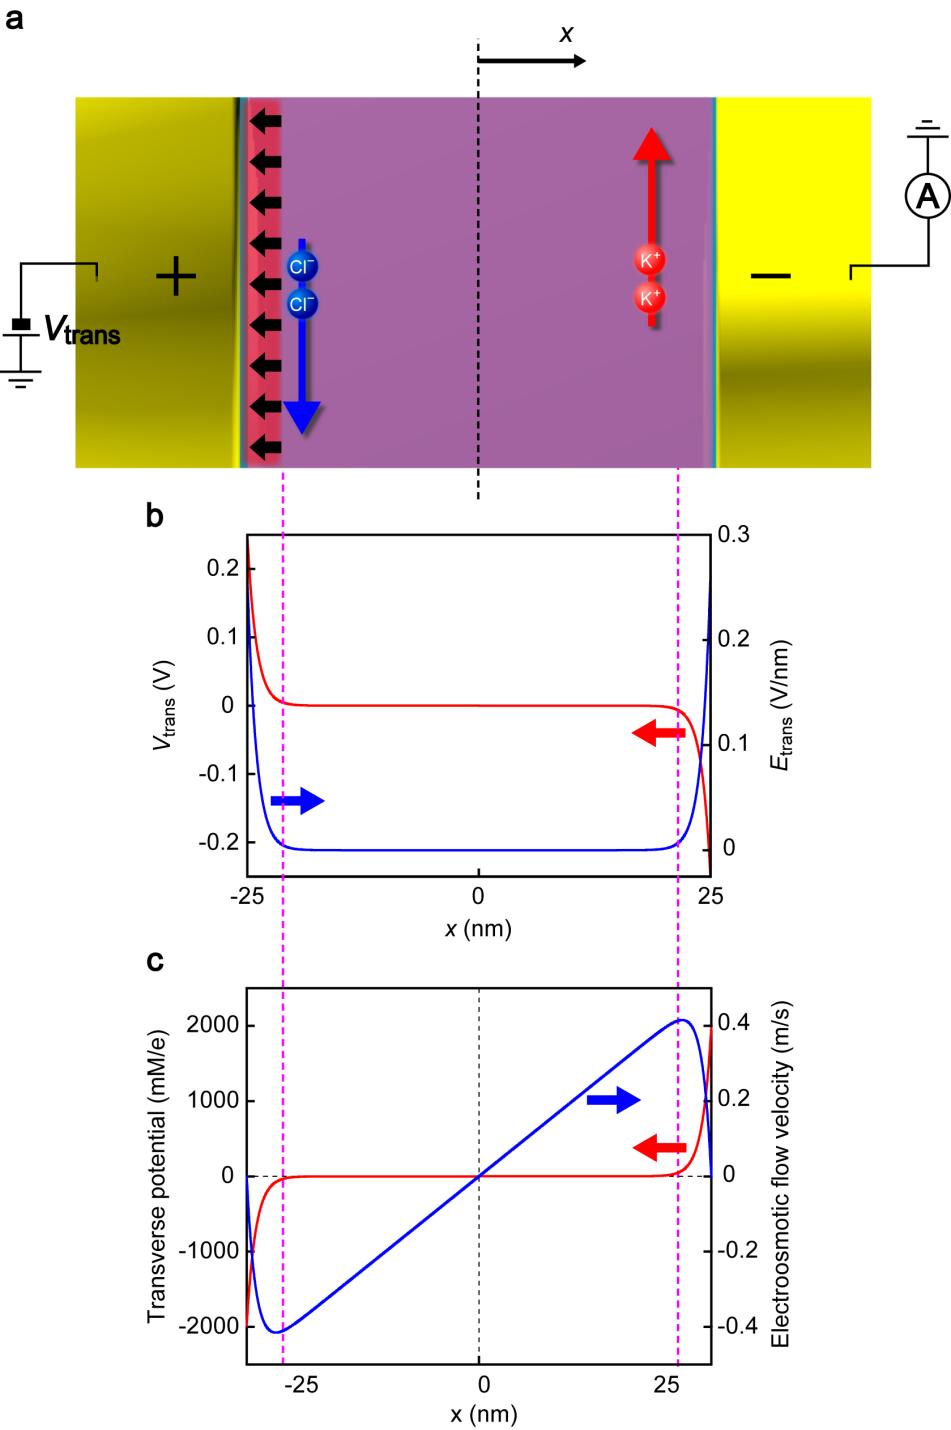 Supplementary Figure S7. Transverse electric field distribution and electroosmotic flow velocity in an electrode-embedded 50-nm channel filled with 0.1 M KCl.